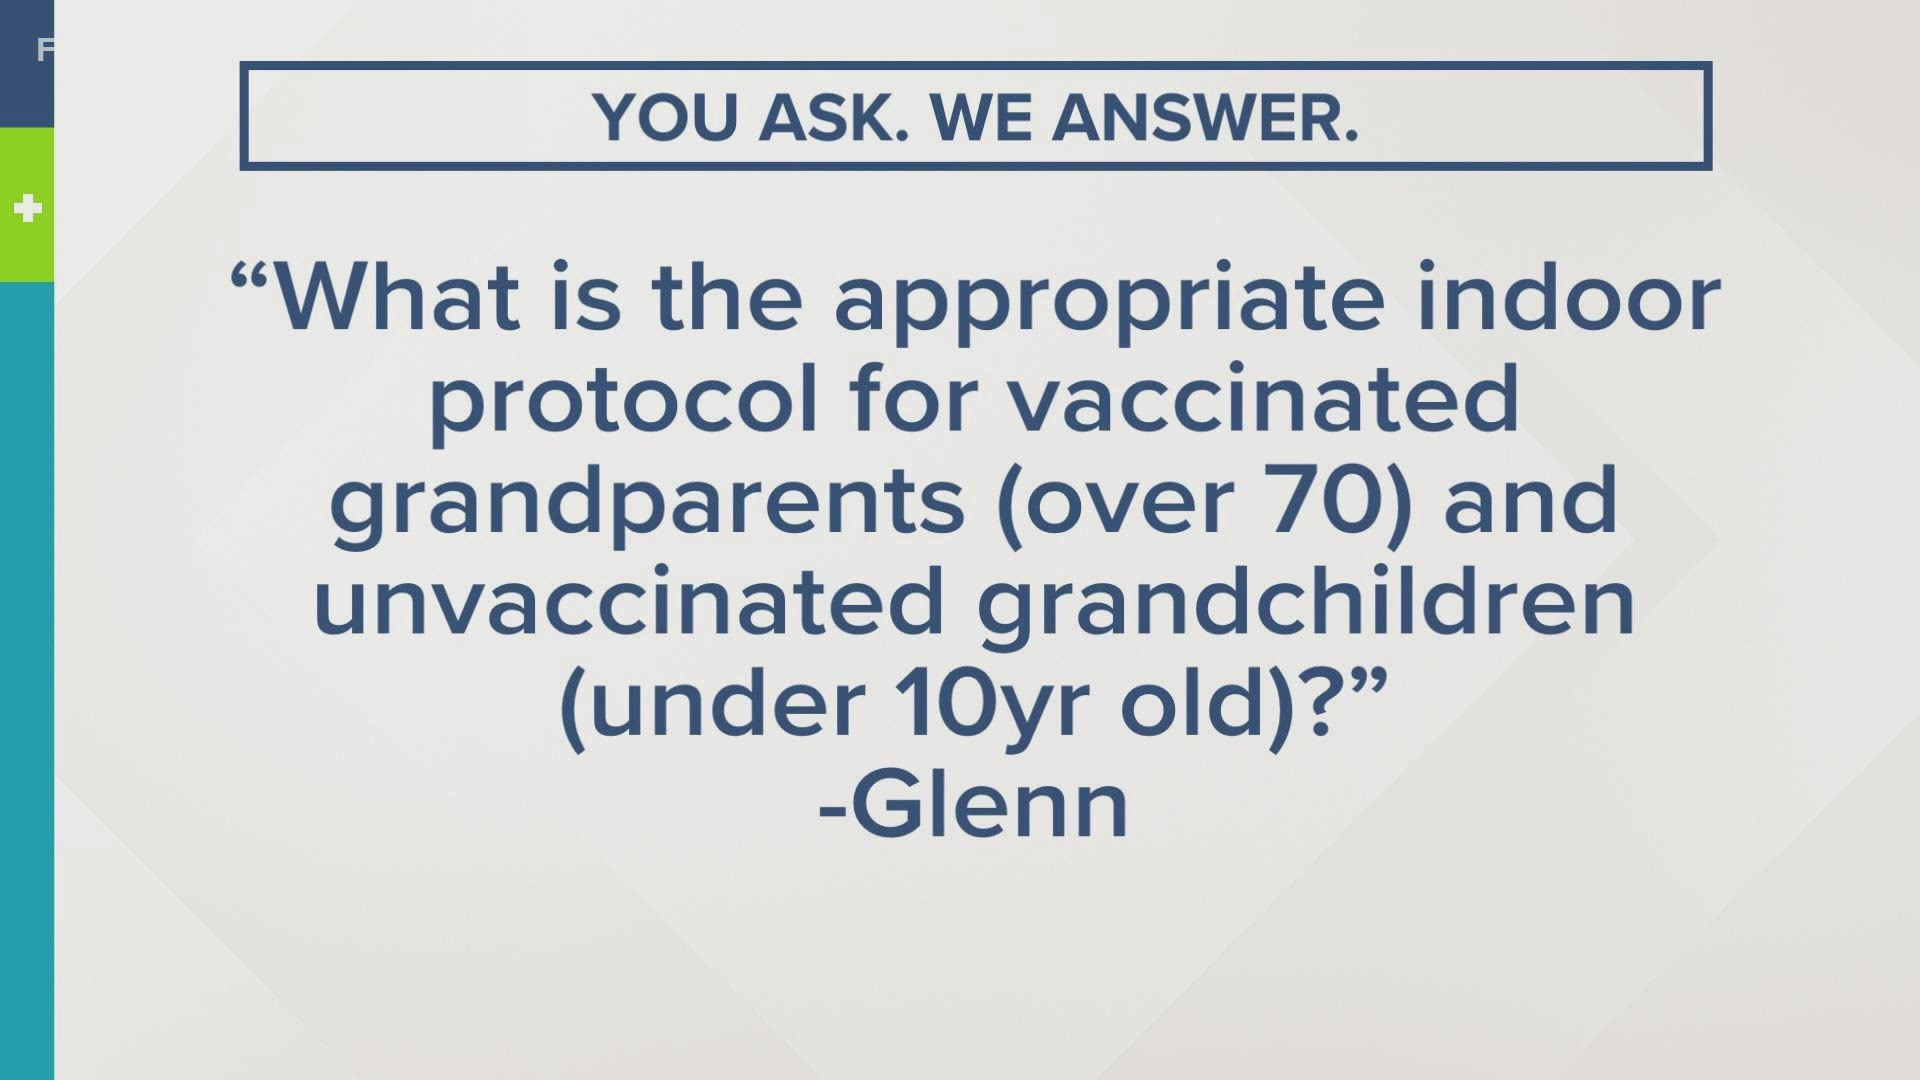 Grant says those who have comorbidities do have to be careful and be aware of unvaccinated individuals.